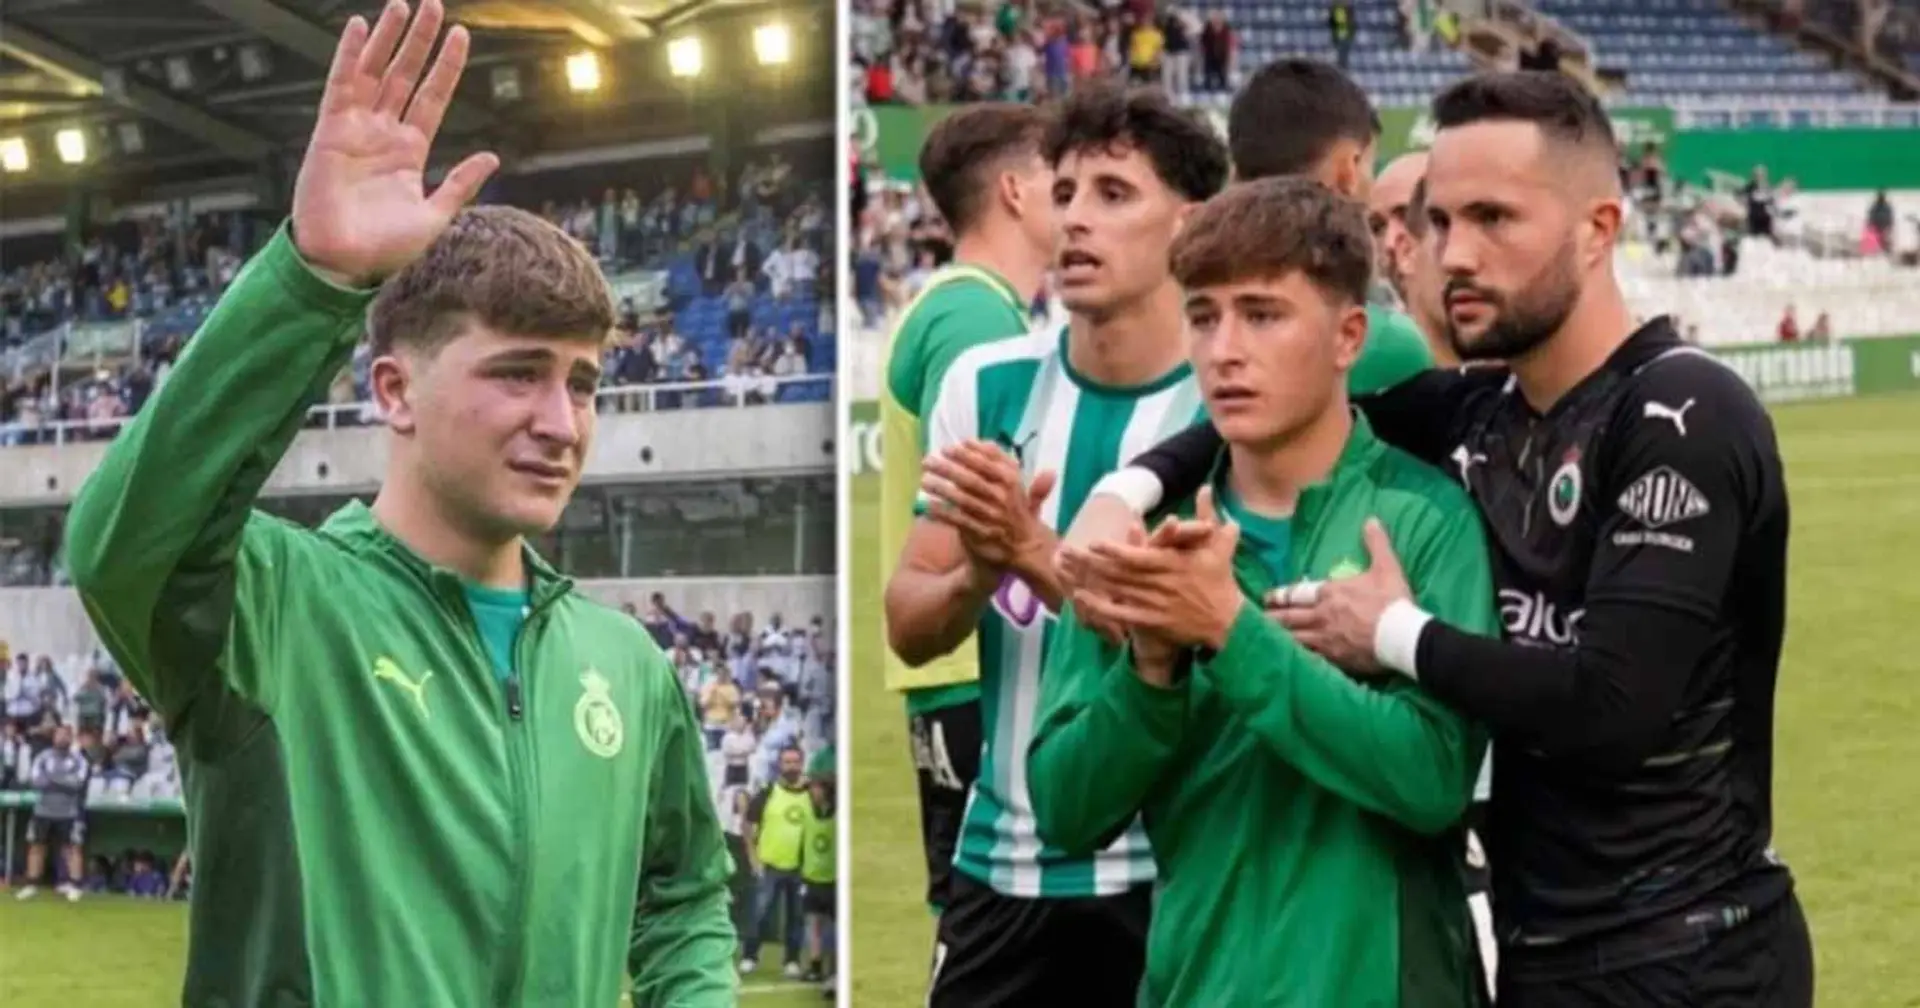 Pablo Torre brought to tears as Racing Santander bid farewell to 19-year-old